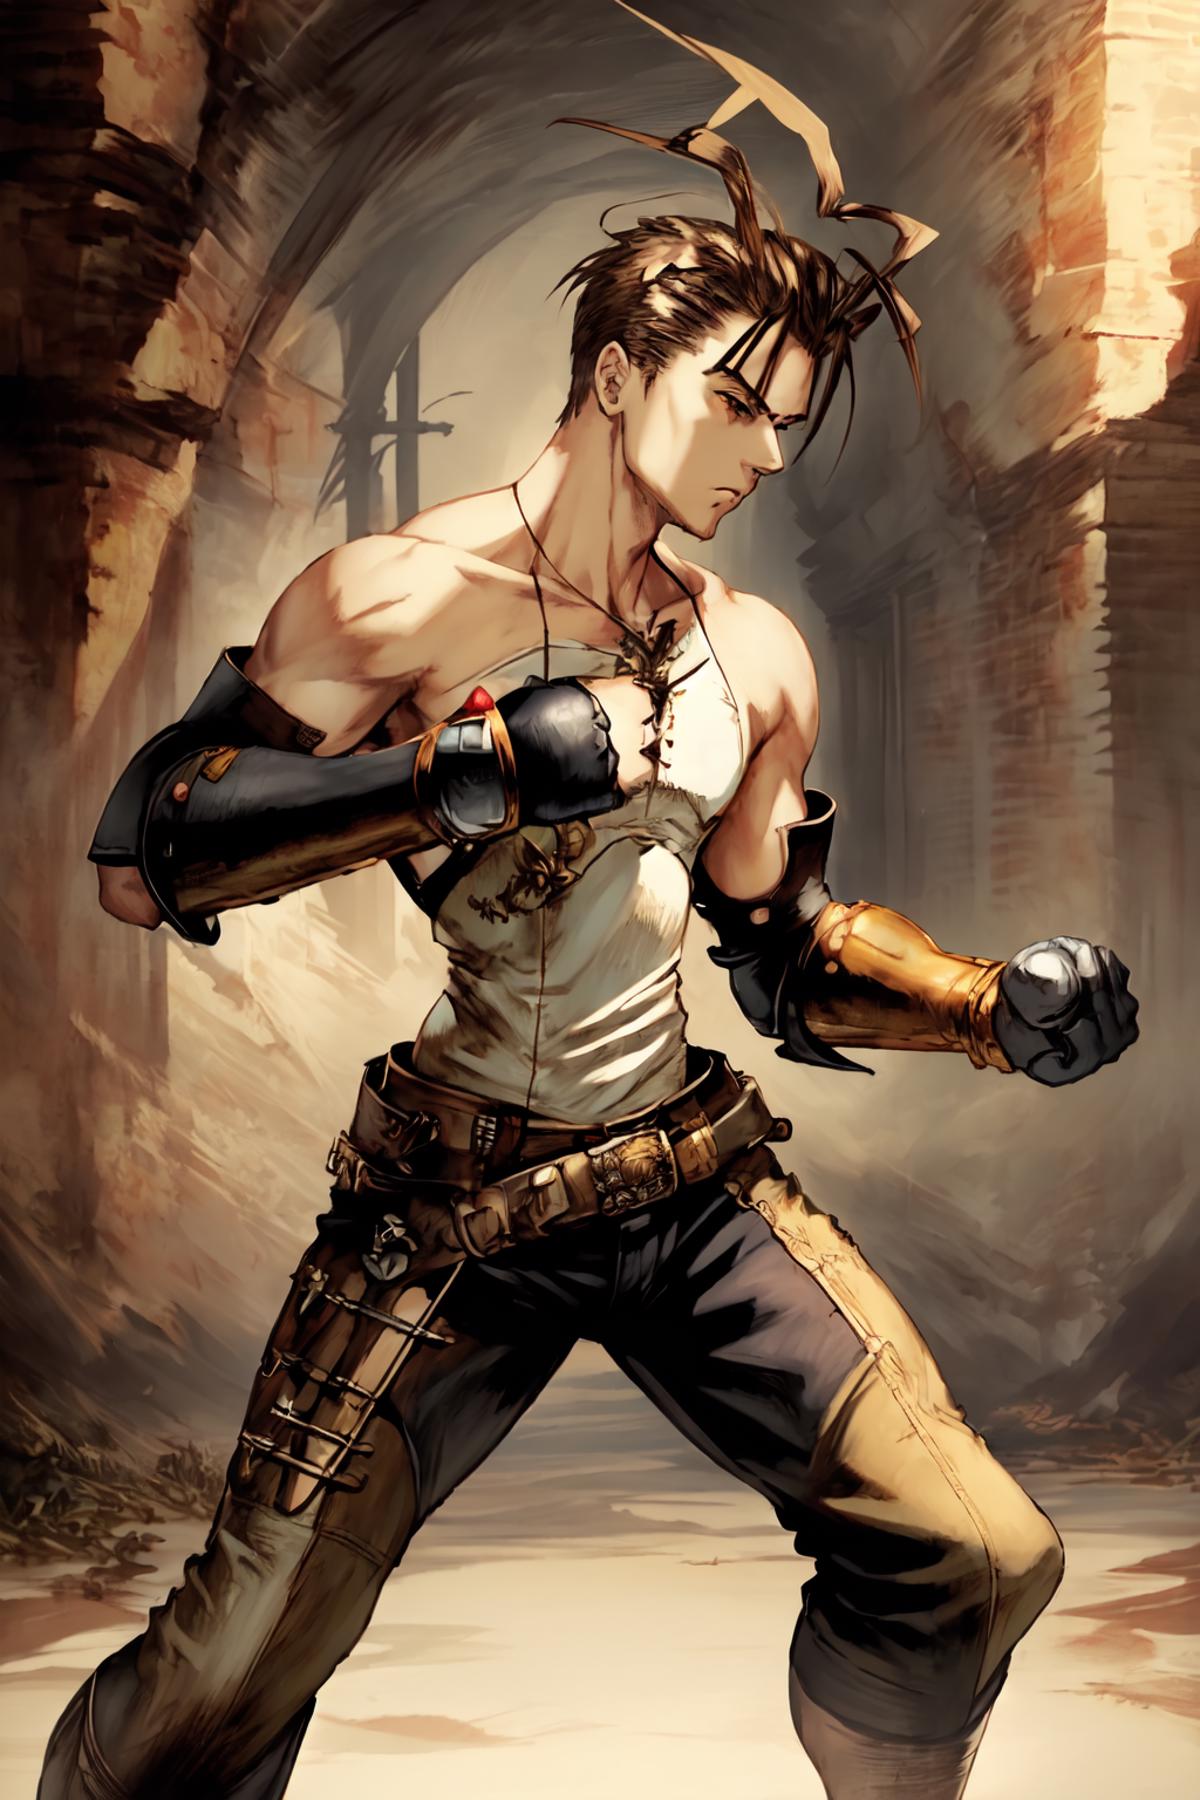 Ashley Riot - Vagrant Story Character & Style image by NostalgiaForever